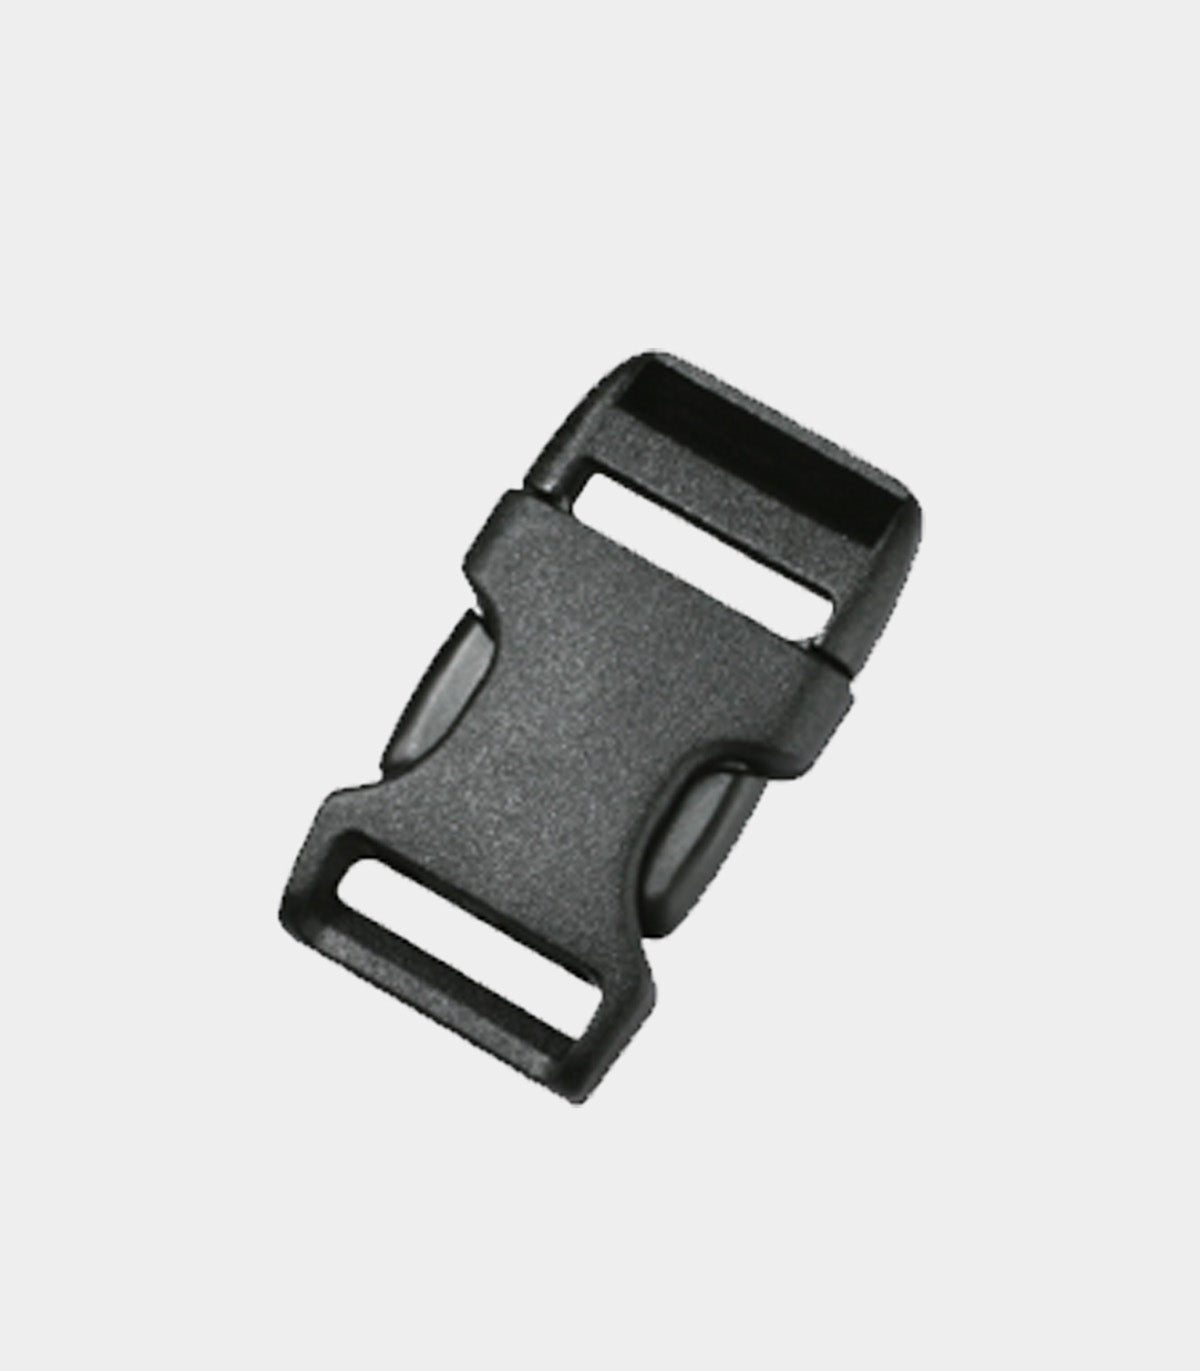 Closed Up Metal Clip Lock With Nylon Strap And Shoulder Support Of Camera  Bag And Backpack Stock Photo - Download Image Now - iStock